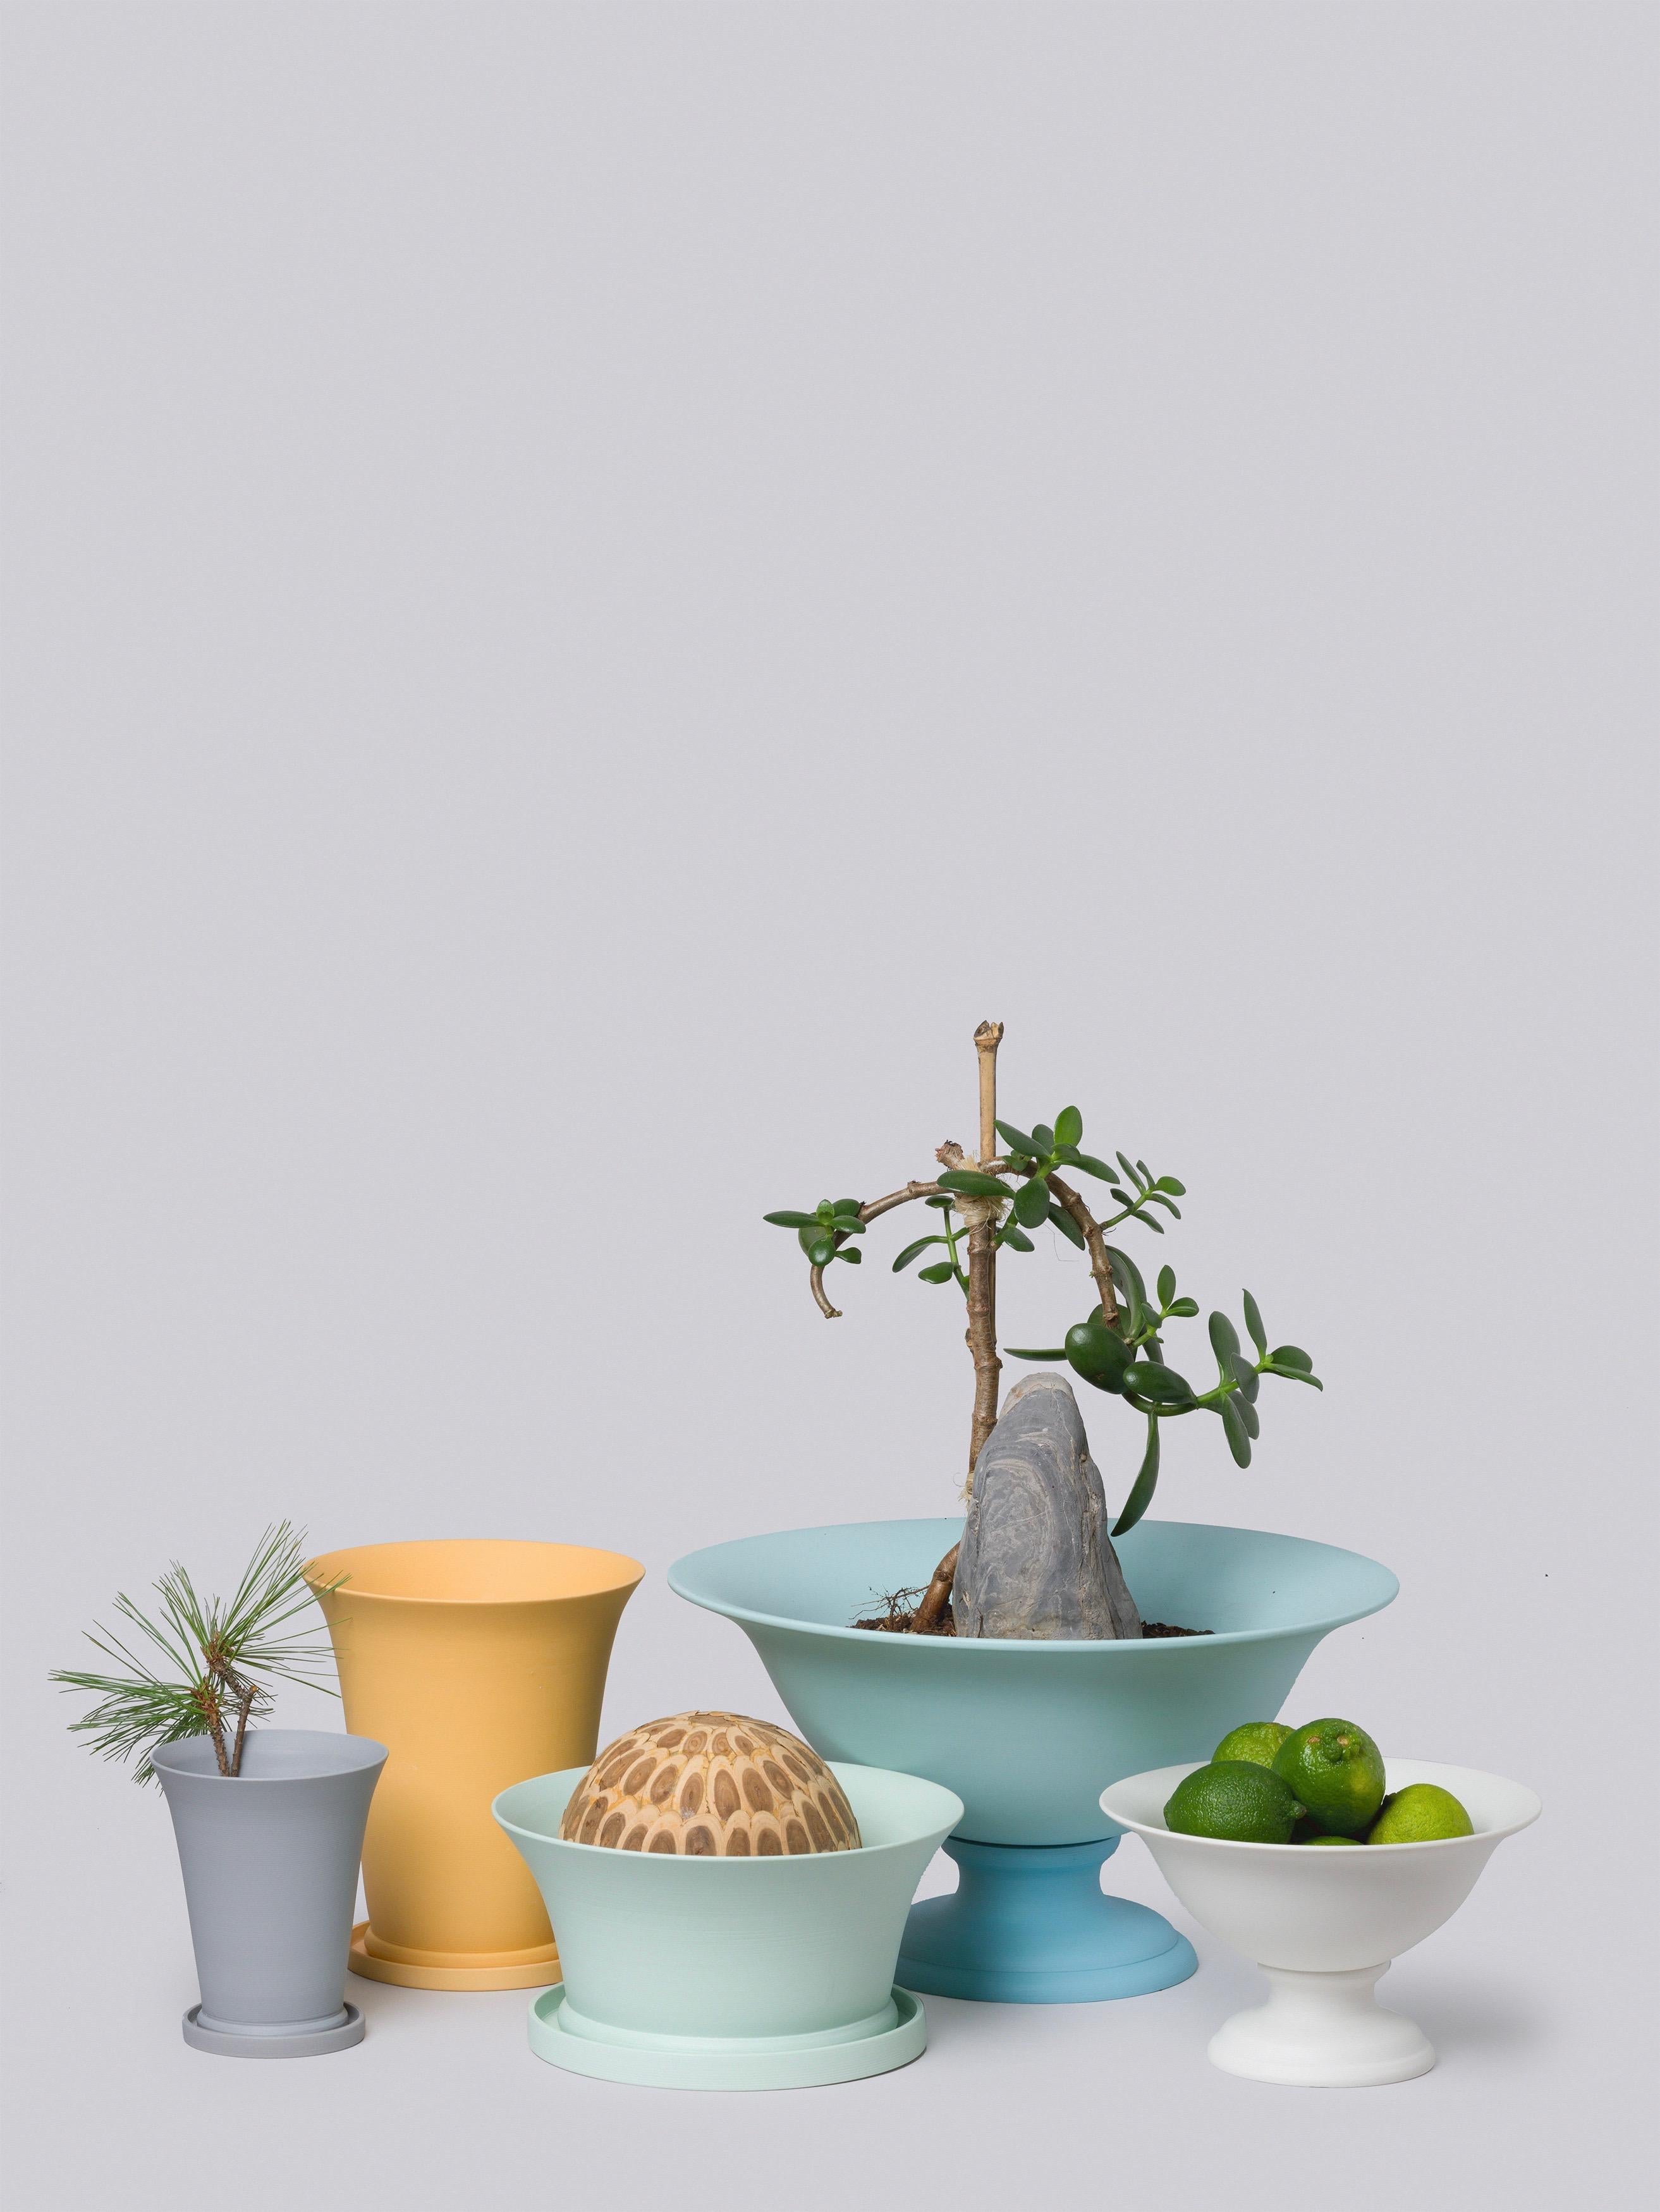 Middle Kingdom garden vaso are modeled after traditional terra cotta wares but are made from pigmented porcelain. The bowl can be moved from the base for planting and watering. The Classic, elegant style of this planter belies its supreme